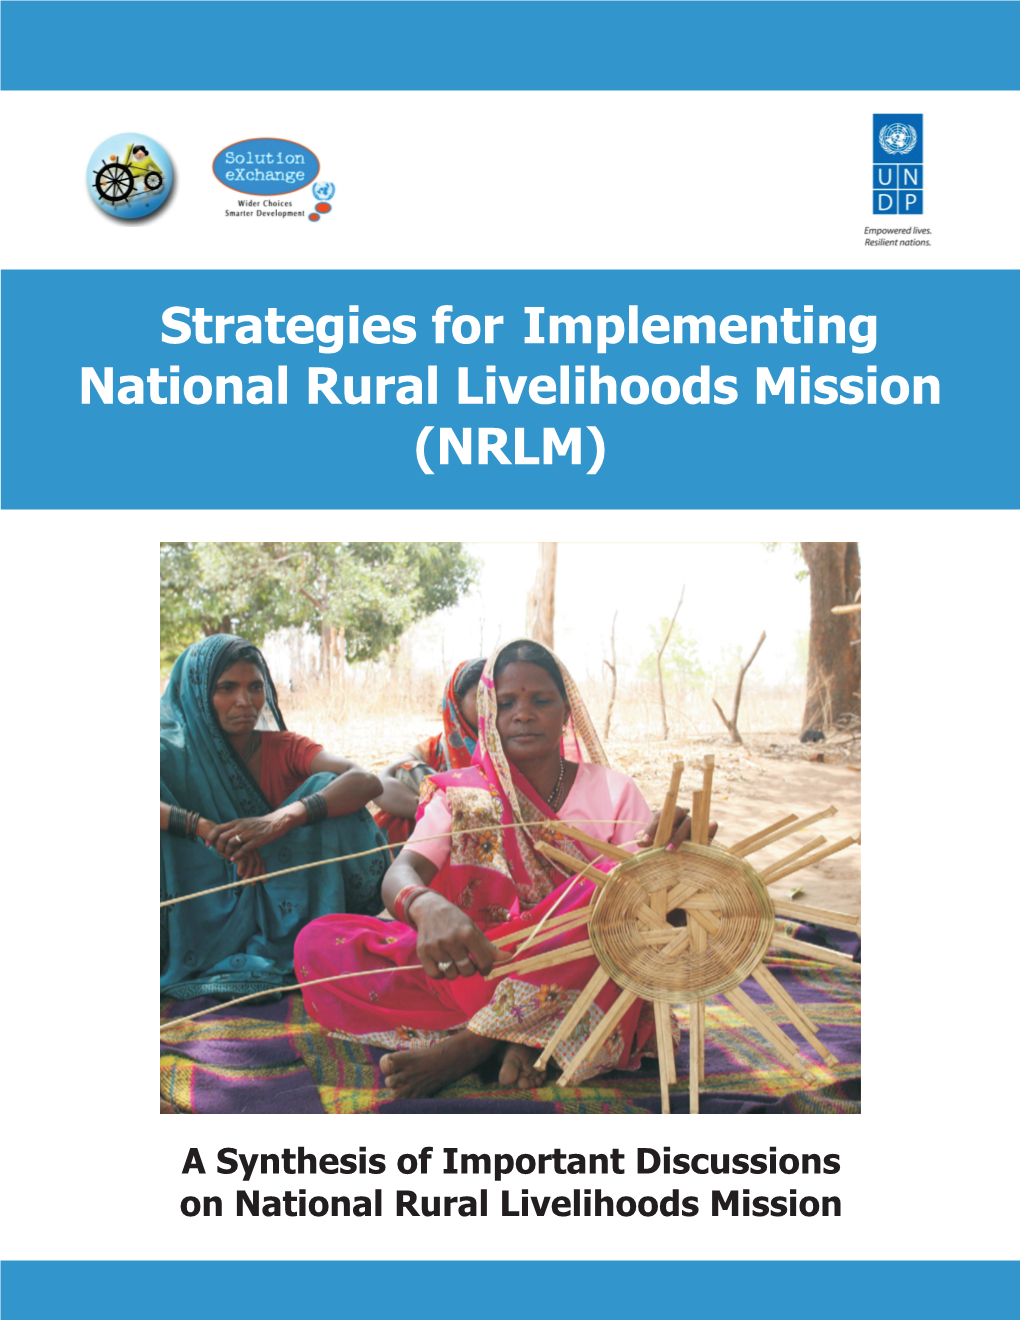 (NRLM) a Synthesis of Important Discussions on National Rural Livelihoods Mission